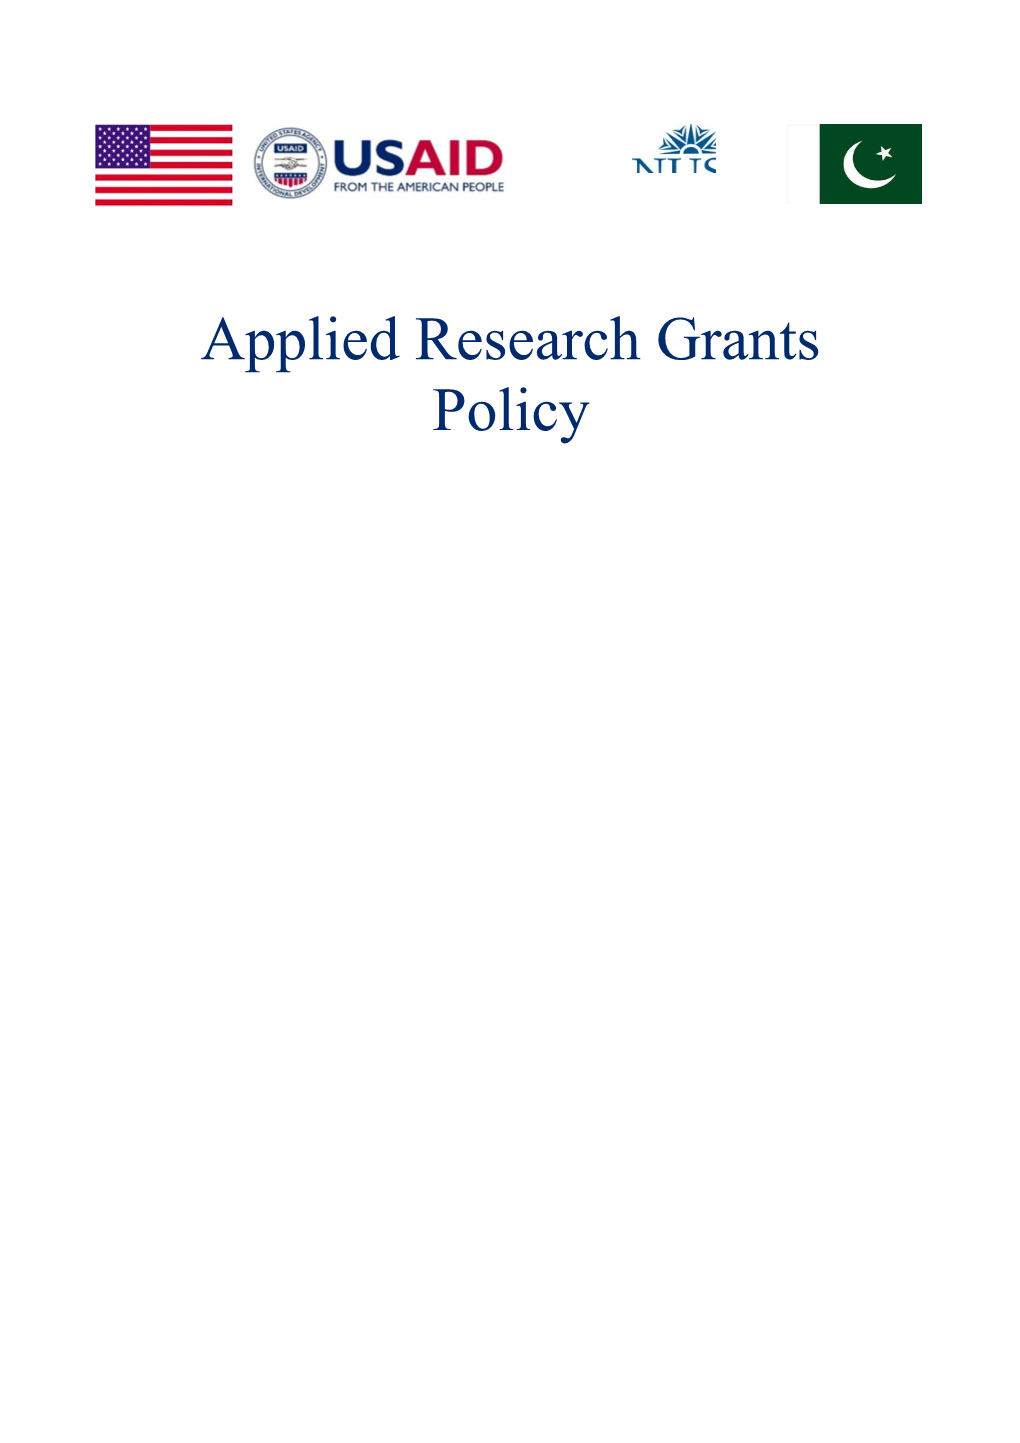 Applied Research Grant Policy